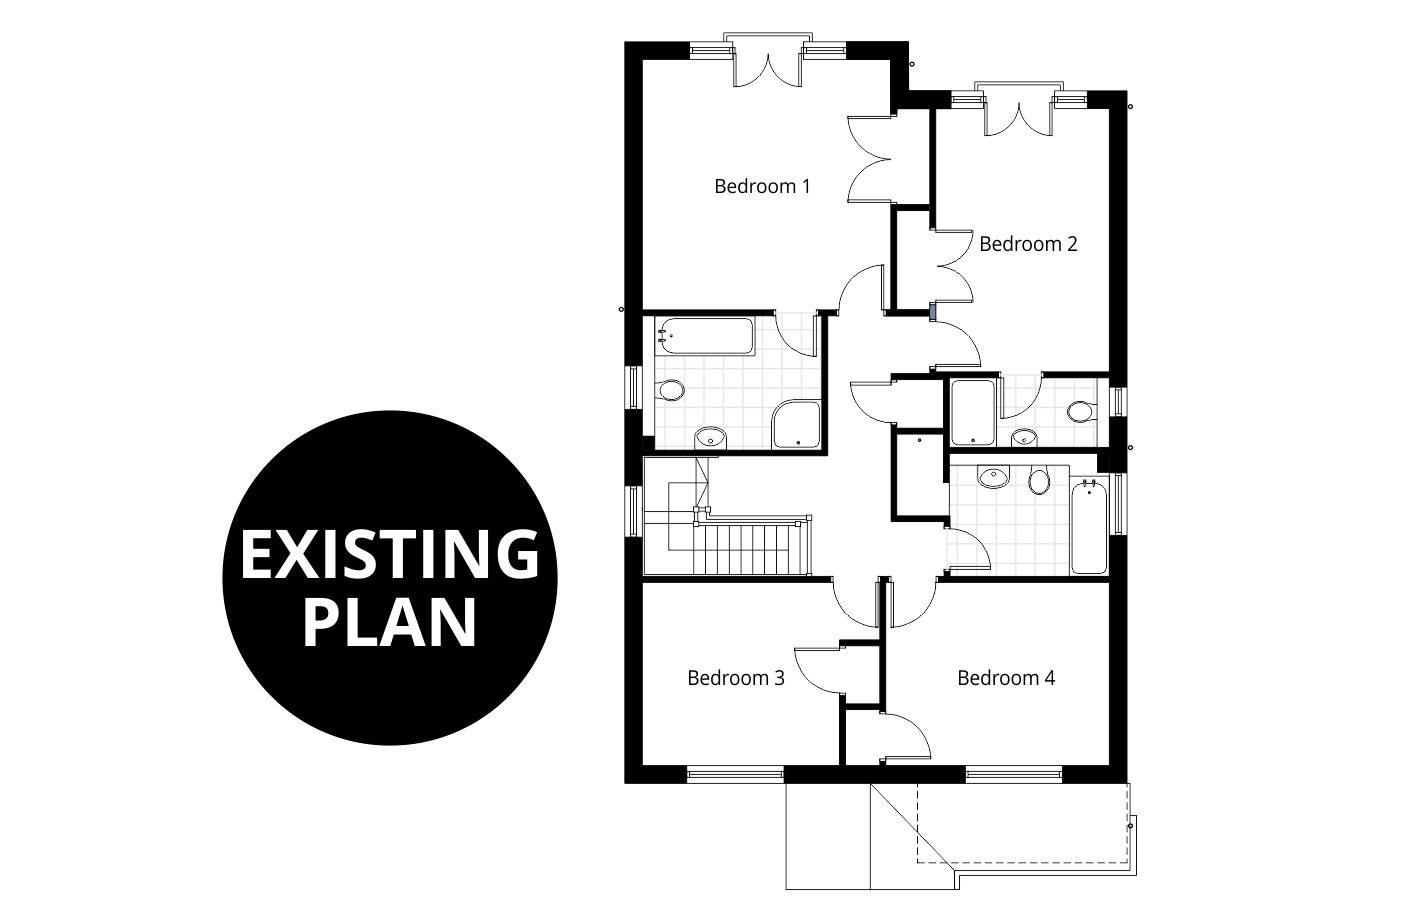 How Do I Get Floor Plans Of An Existing House Uk